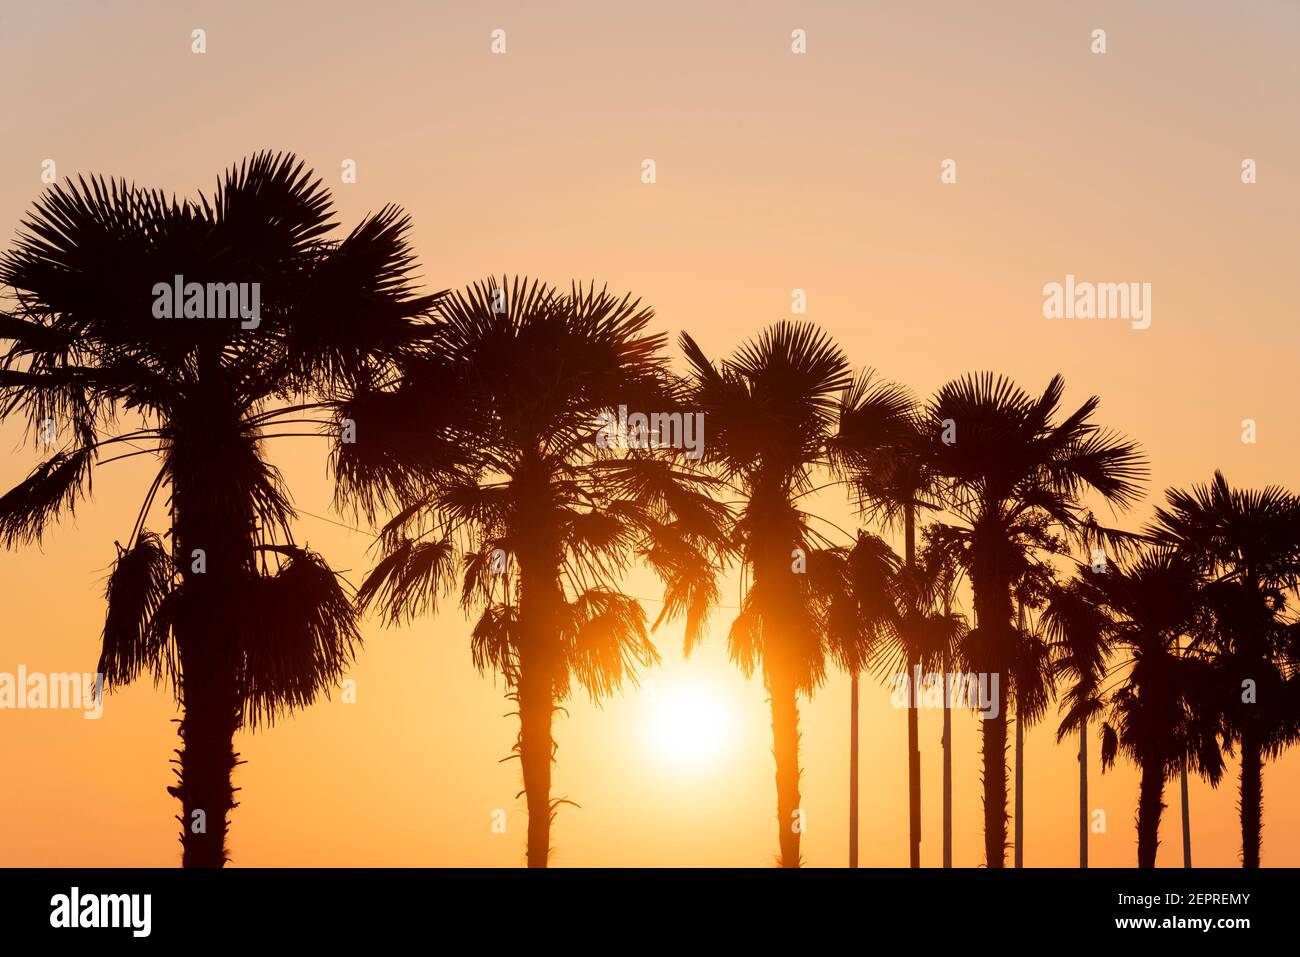 Low sun setting behind palm trees in Southend on Sea, Essex, UK. Dusk, evening colourful sunset with silhouette palm tree Stock Photo